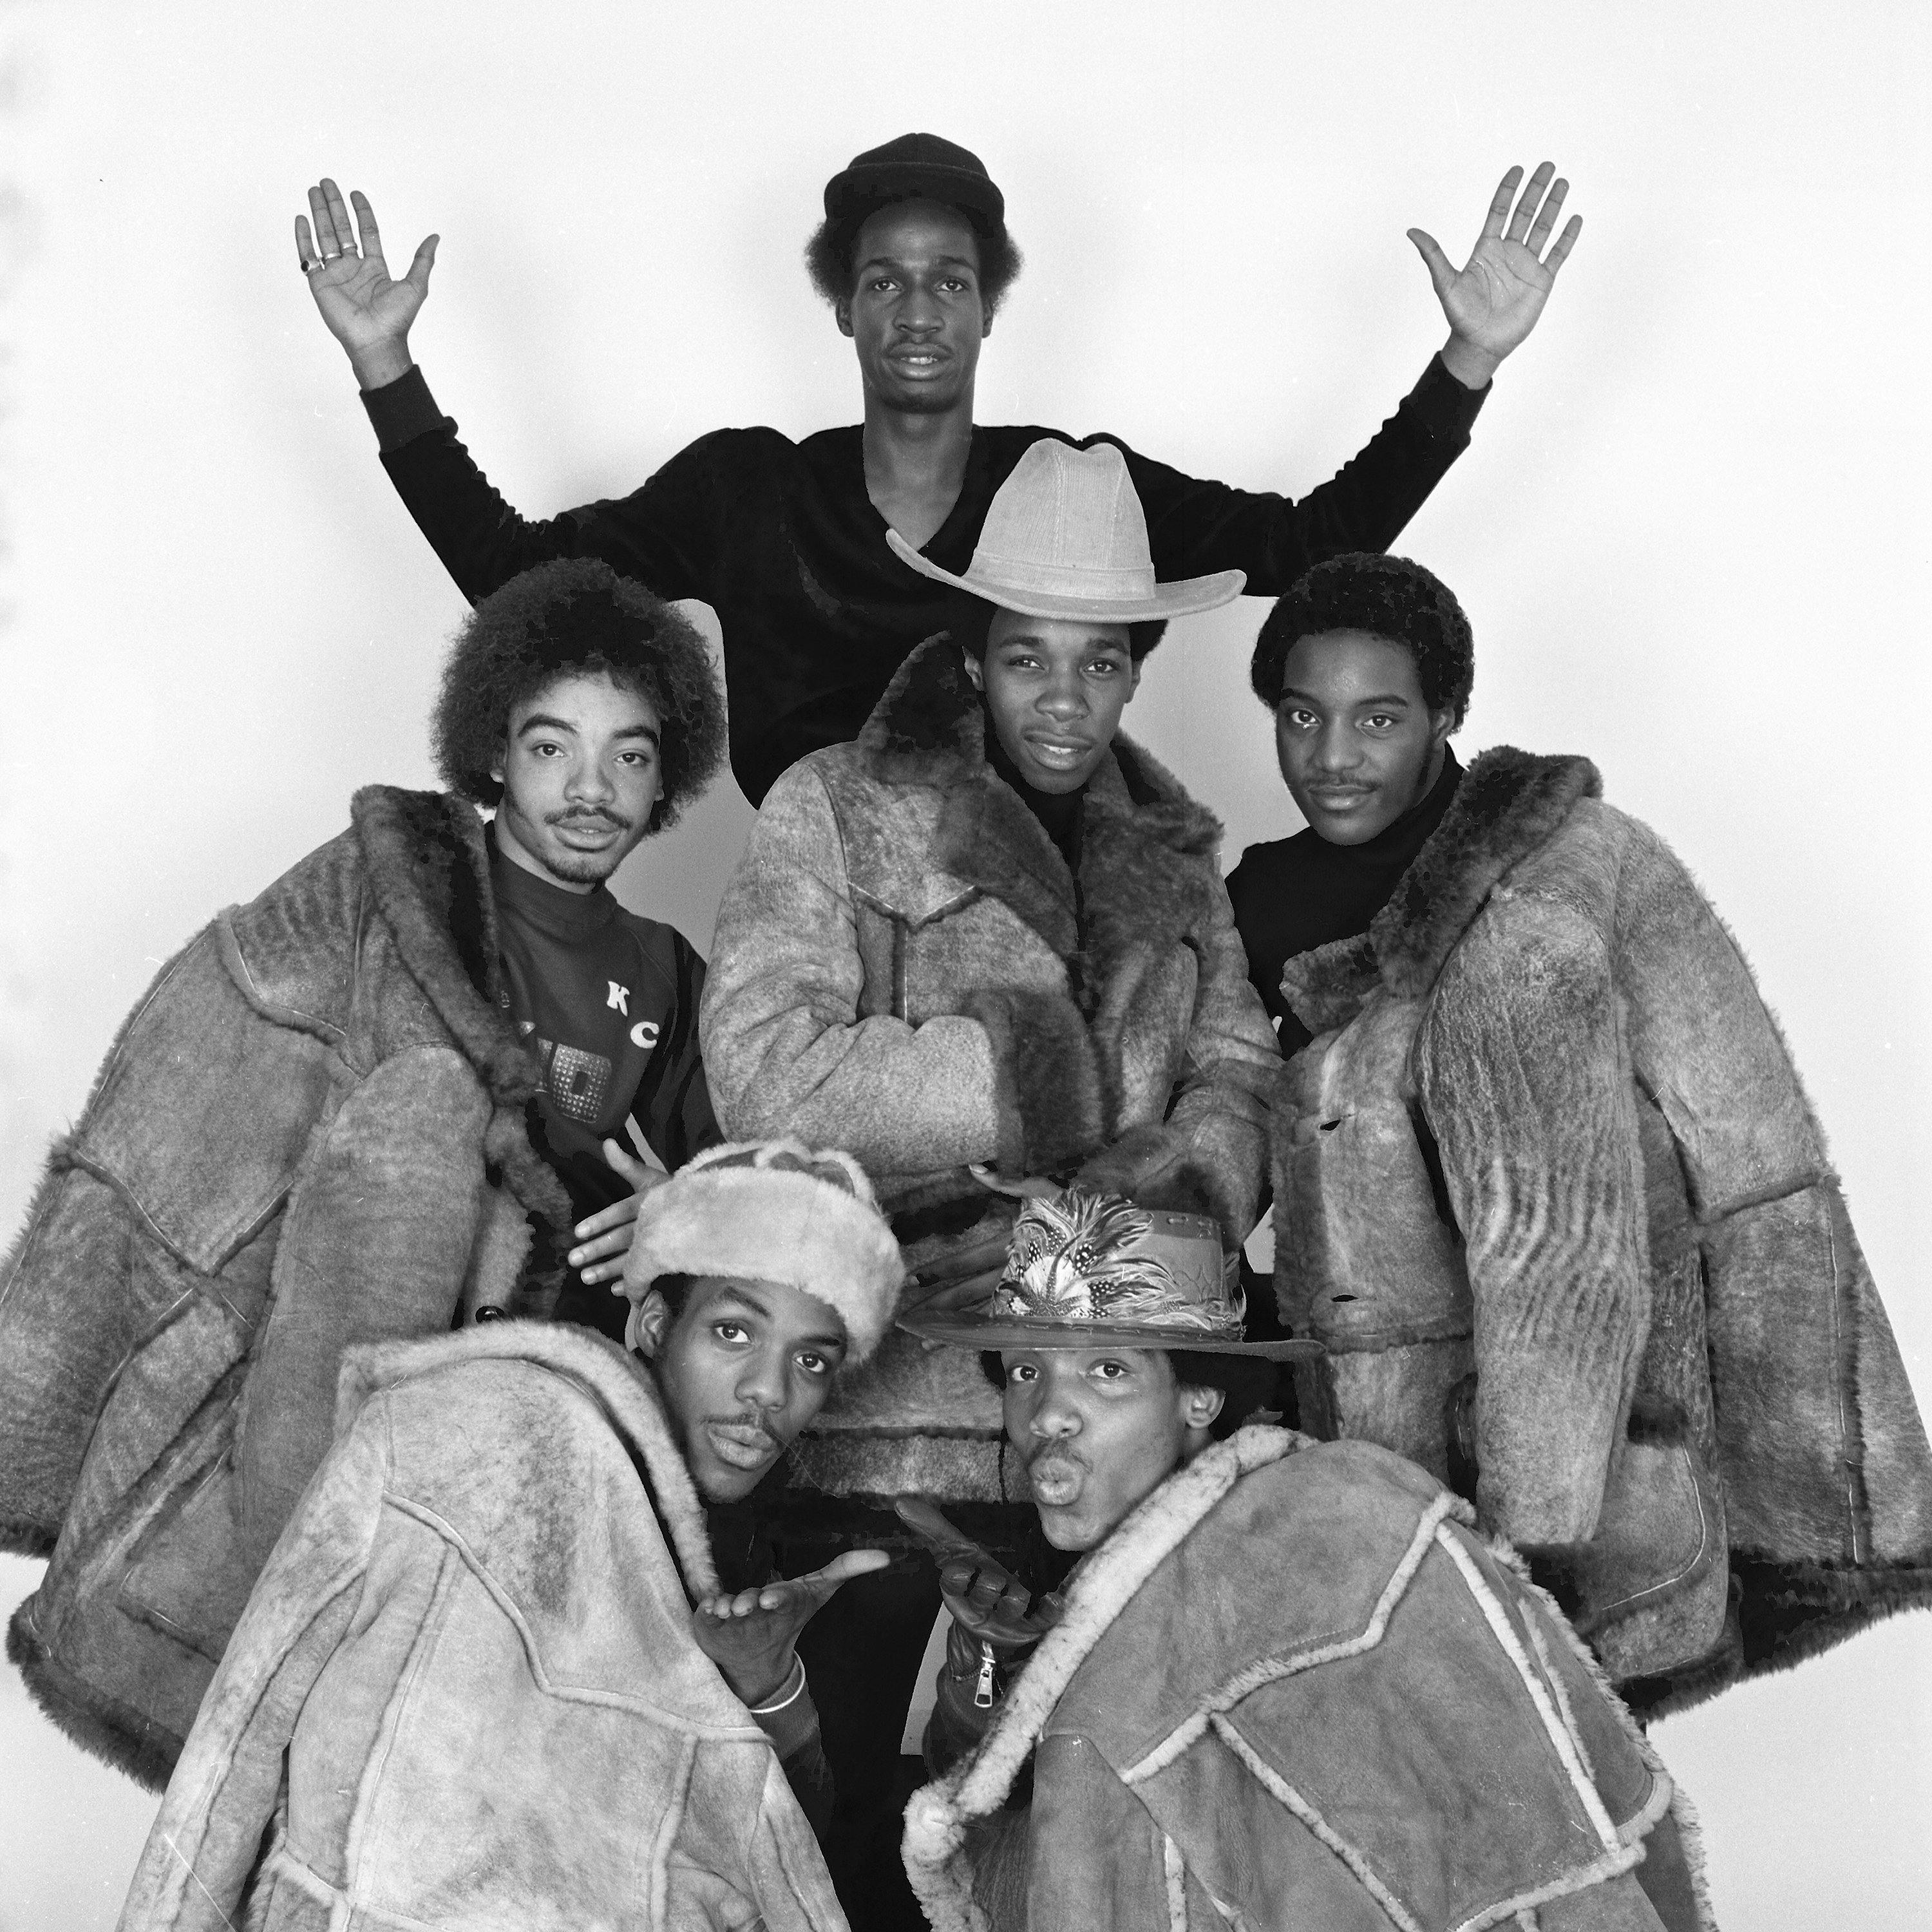 Grandmaster Flash and the Furious Five, New York, December 1980